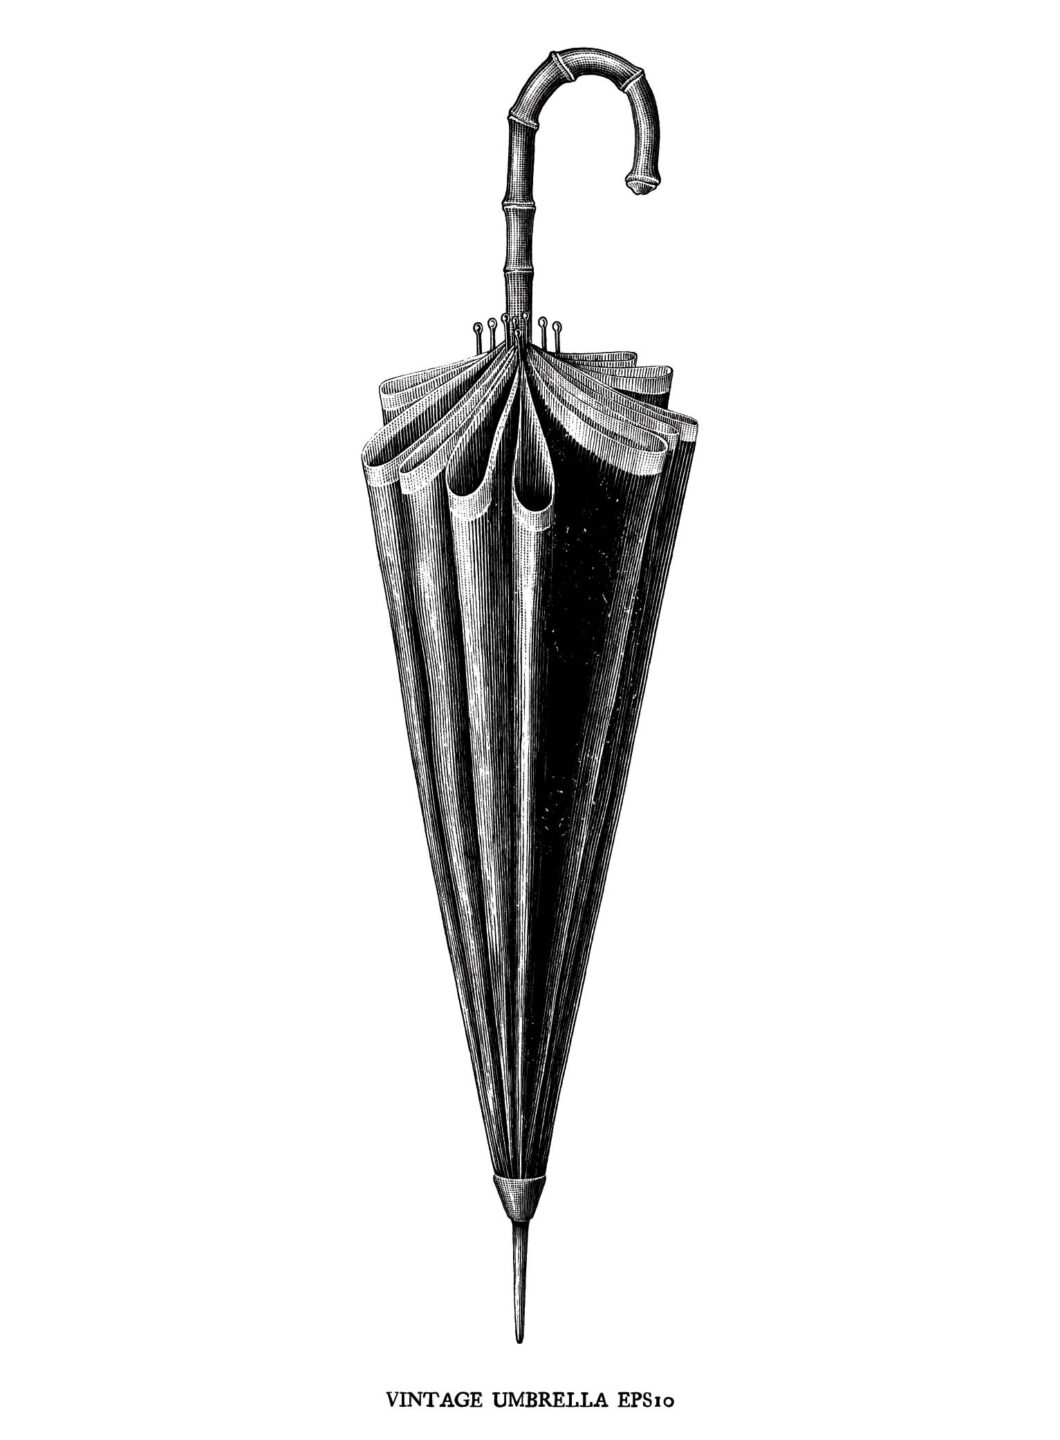 Line draw umbrella with a curved handle standing on its point.